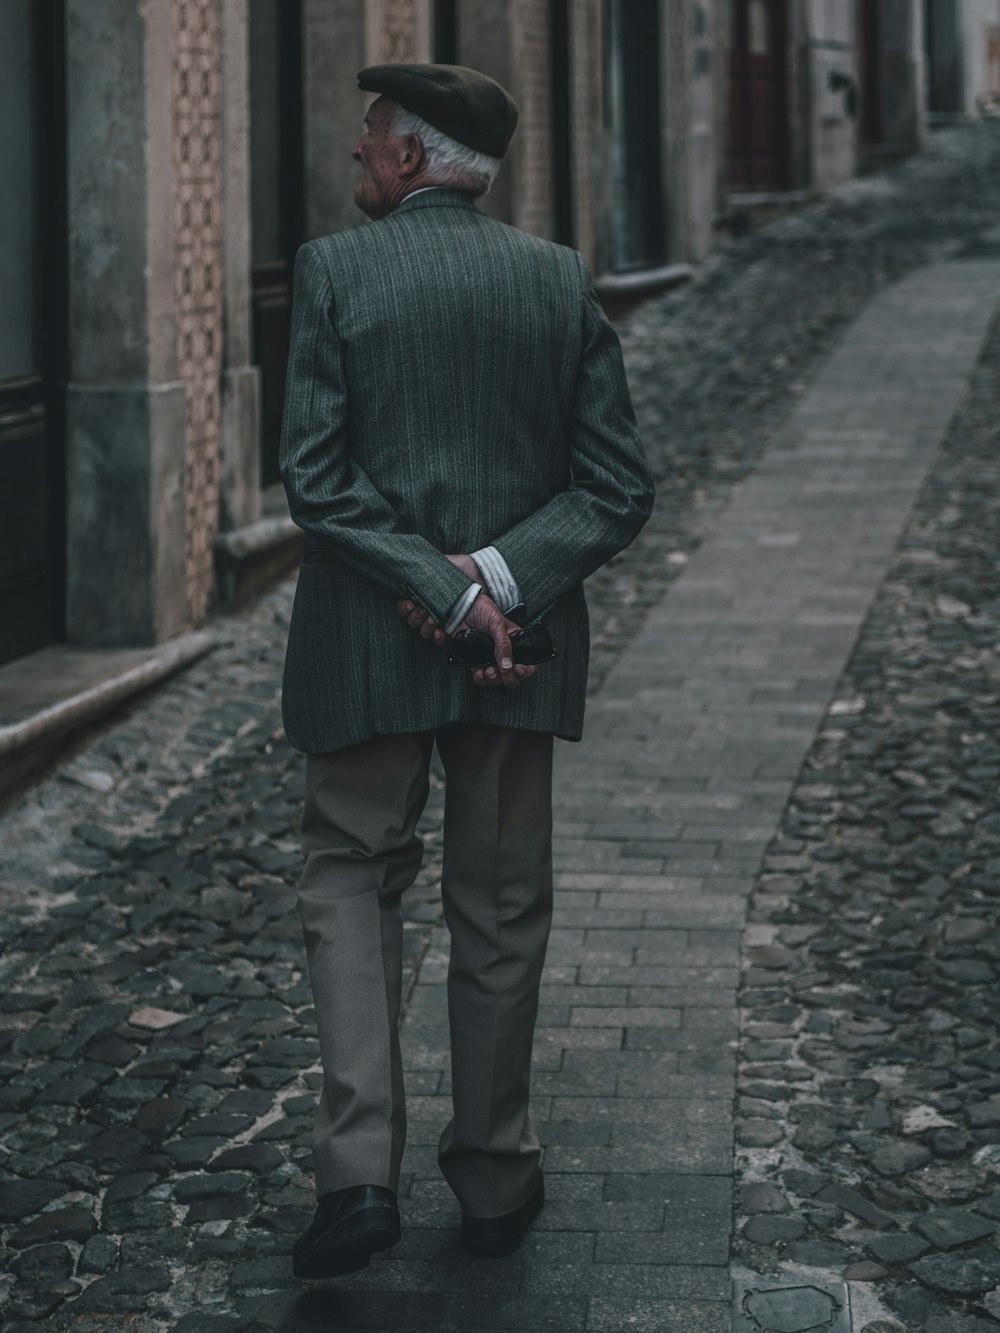 man in green coat walking on brick pavement in between concrete buildings during daytime